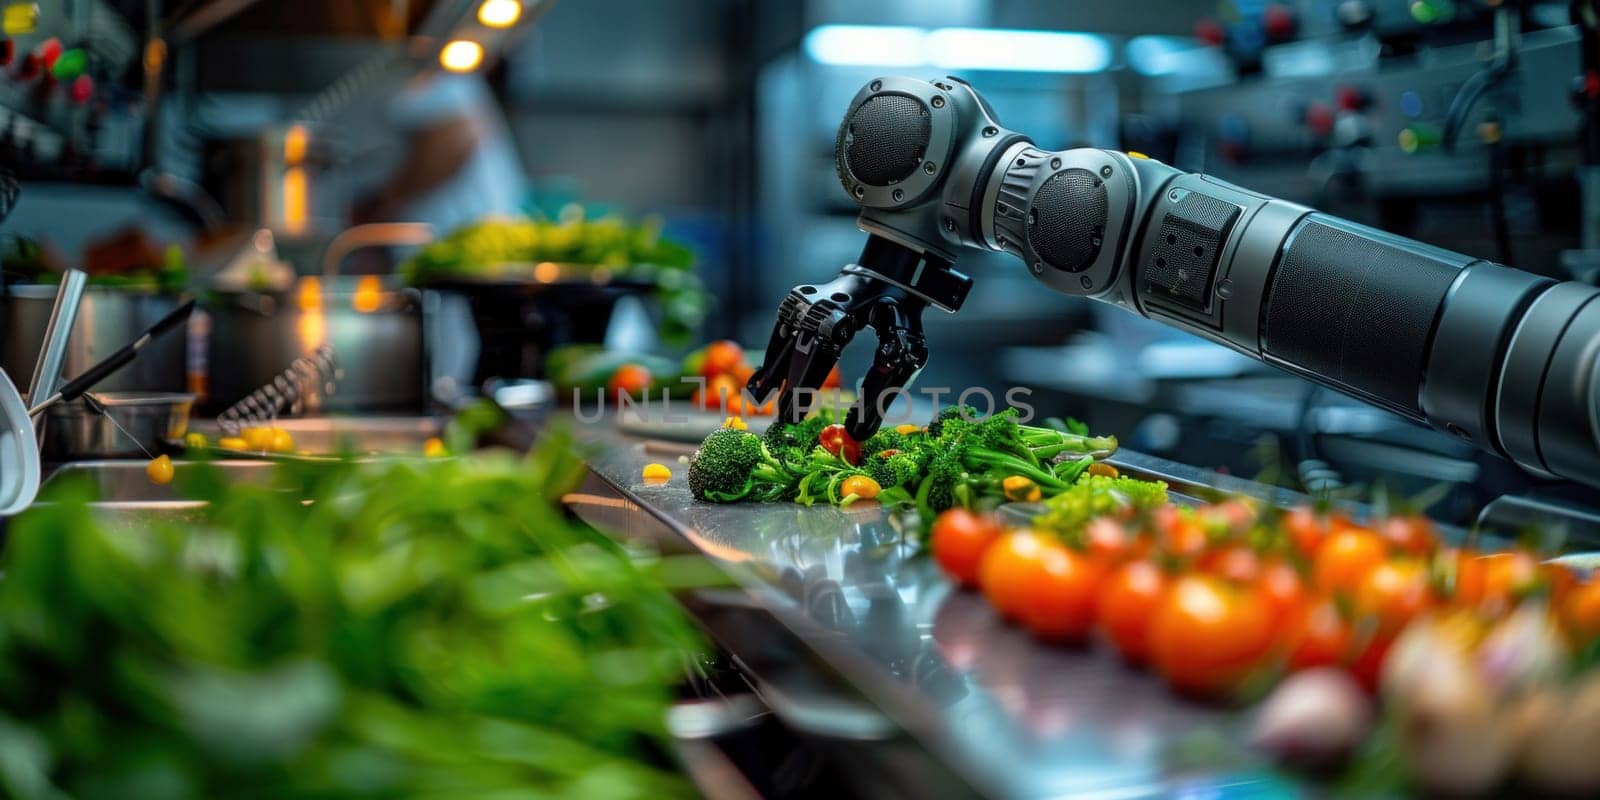 A robot is standing in a modern kitchen, surrounded by appliances and utensils.